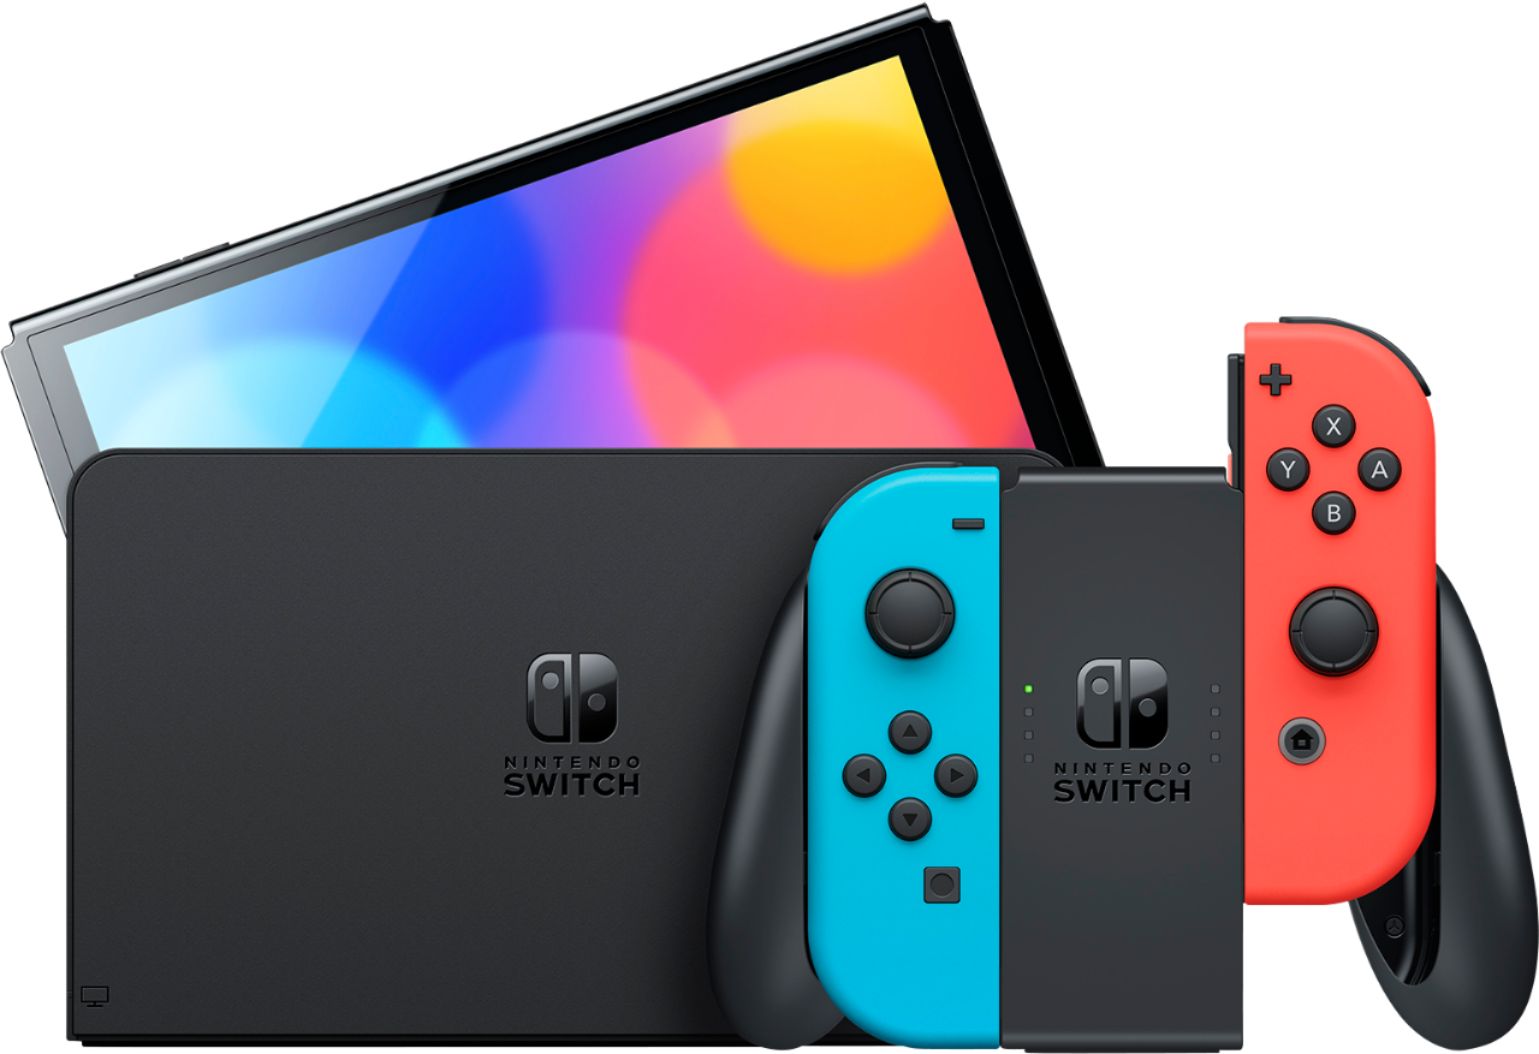 2022 New Nintendo Switch OLED Model Neon Red Blue with Pokemon Sword and Mytrix Full Body Skin Sticker for NS OLED Console, Dock and Joycons - Sakura Pink